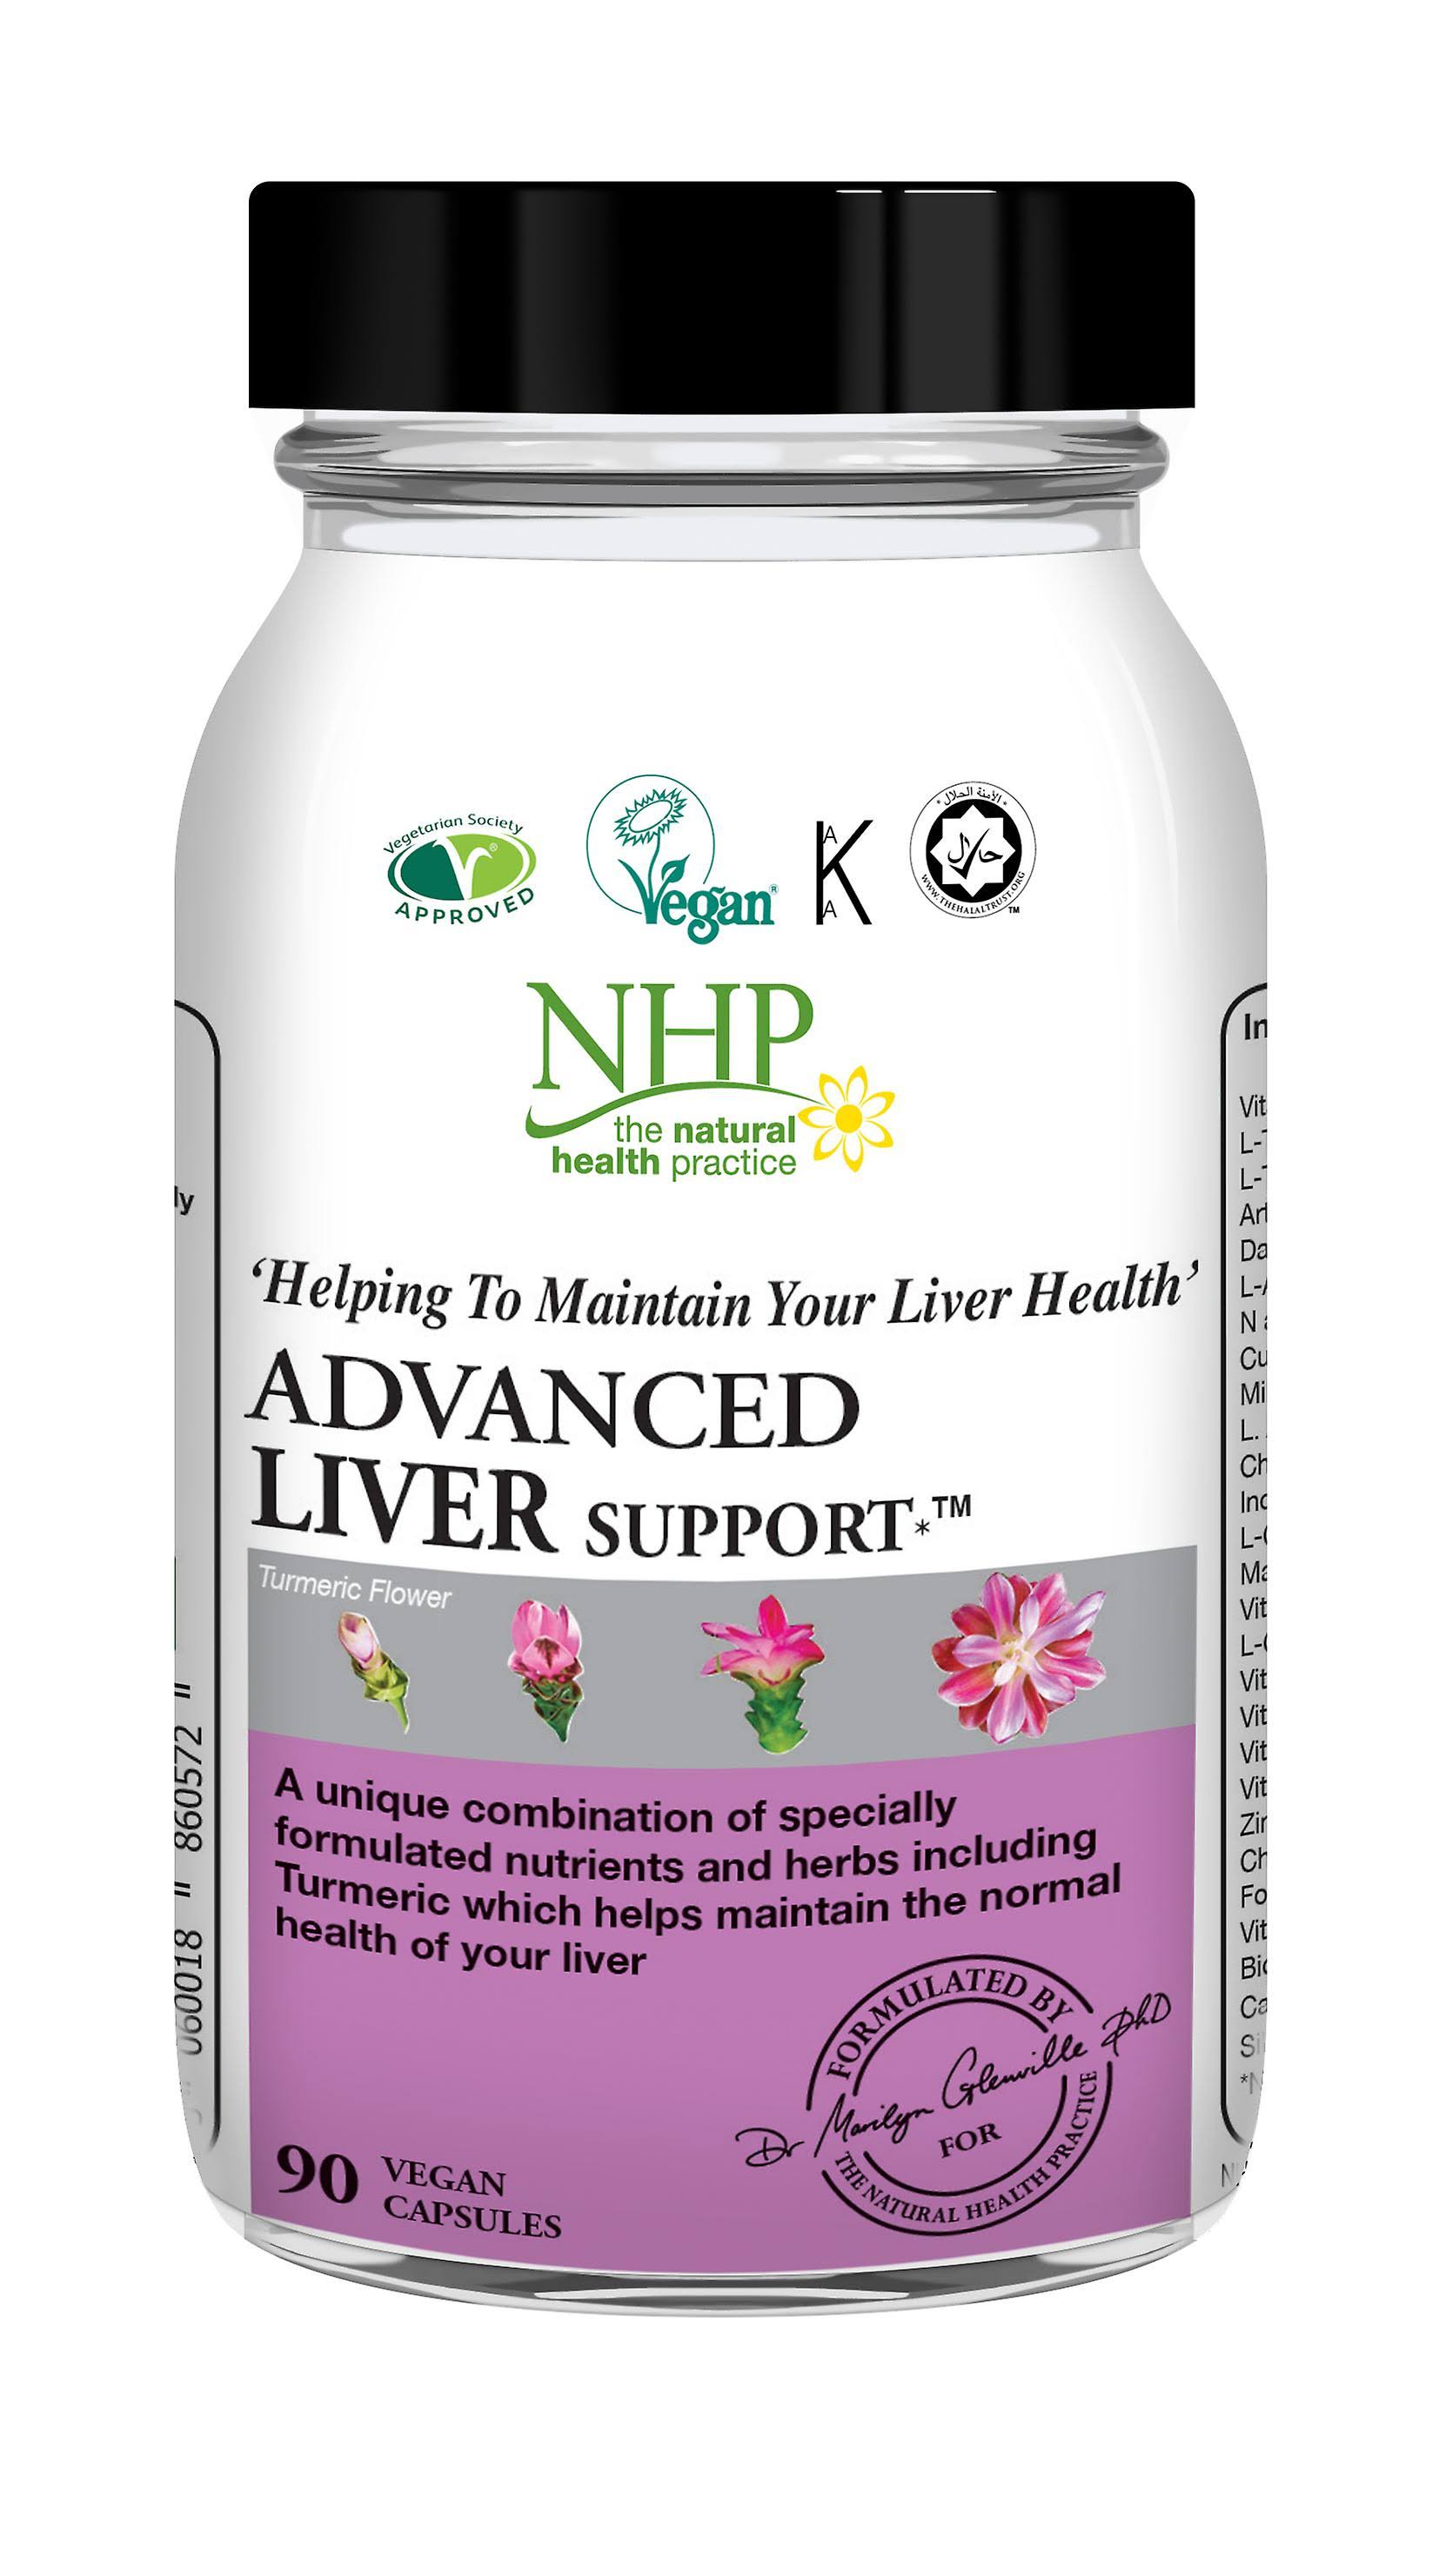 NHP Advanced Liver Support - 90 Capsules - Natural Health Practice